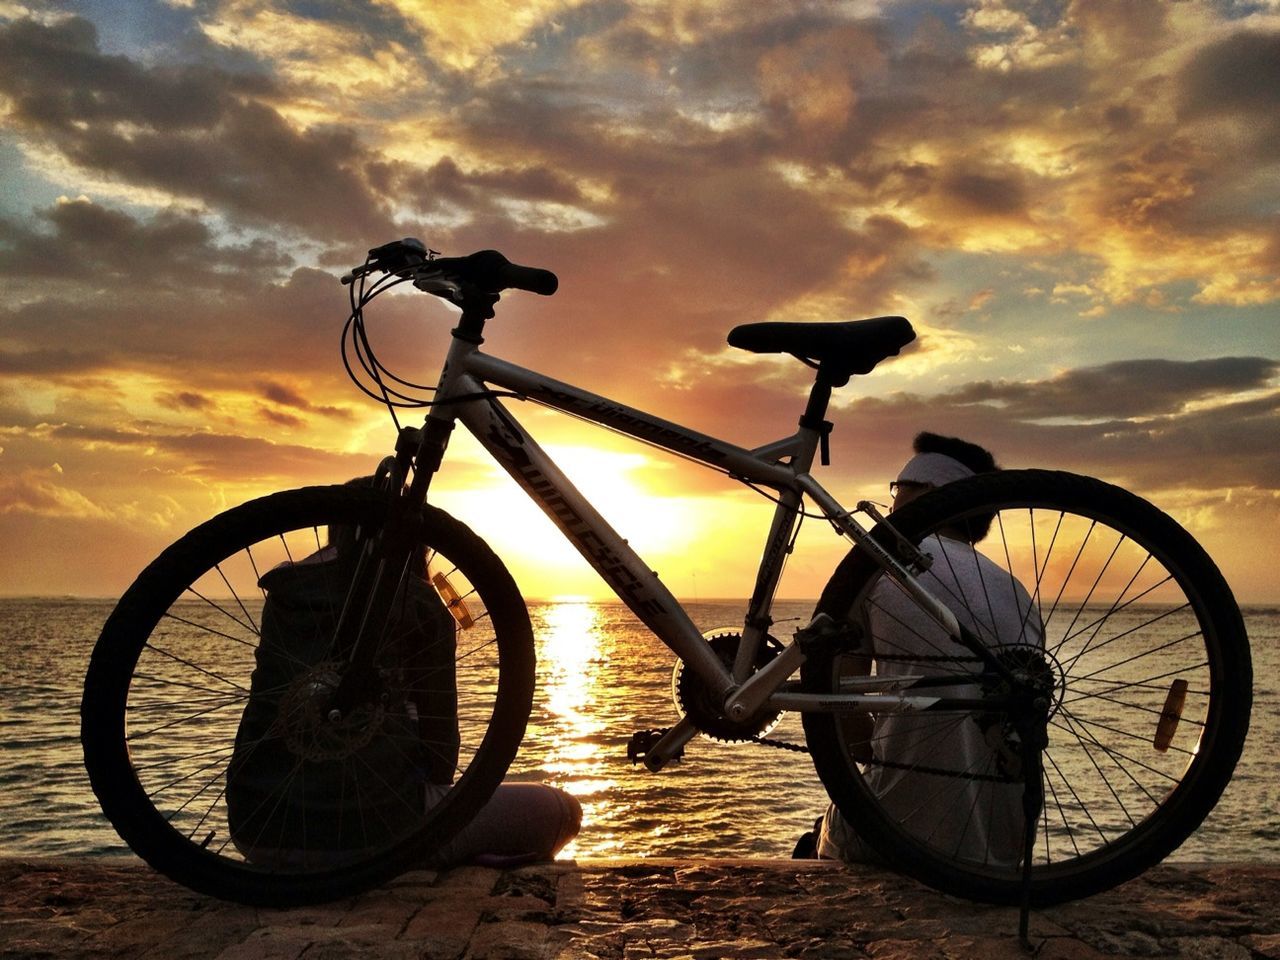 bicycle, sunset, sky, transportation, mode of transport, land vehicle, cloud - sky, stationary, parking, orange color, parked, silhouette, cloud, tranquility, wheel, cloudy, scenics, dramatic sky, no people, beauty in nature